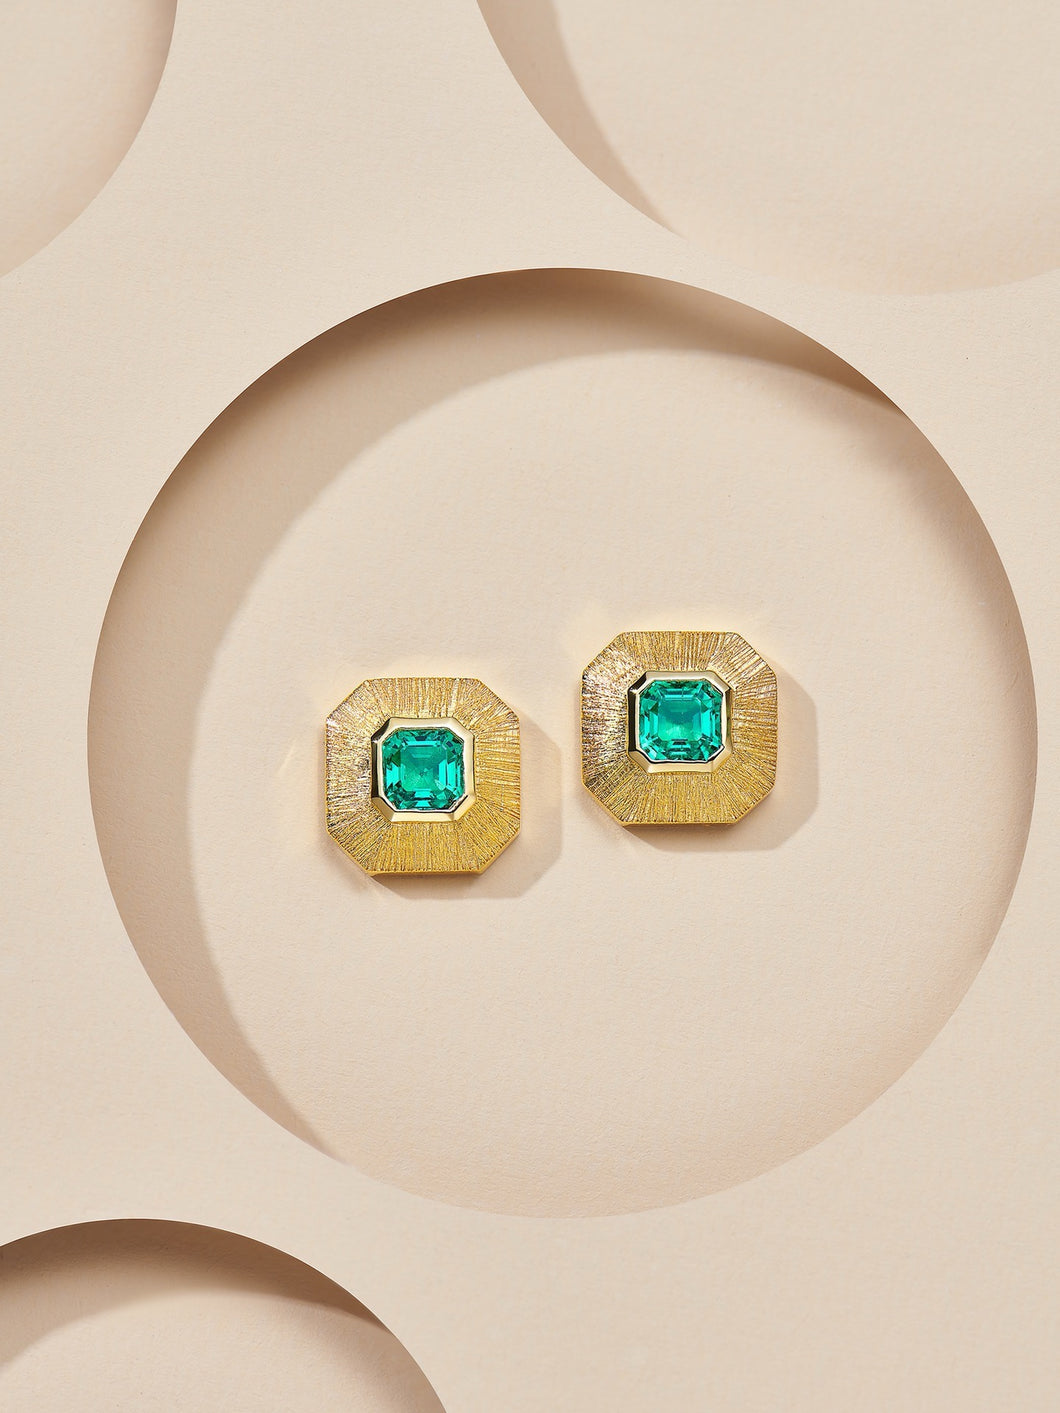 Handcrafted 0.3 CT Colombia Emerald Stud Earrings | Sophisticated Gift for Her